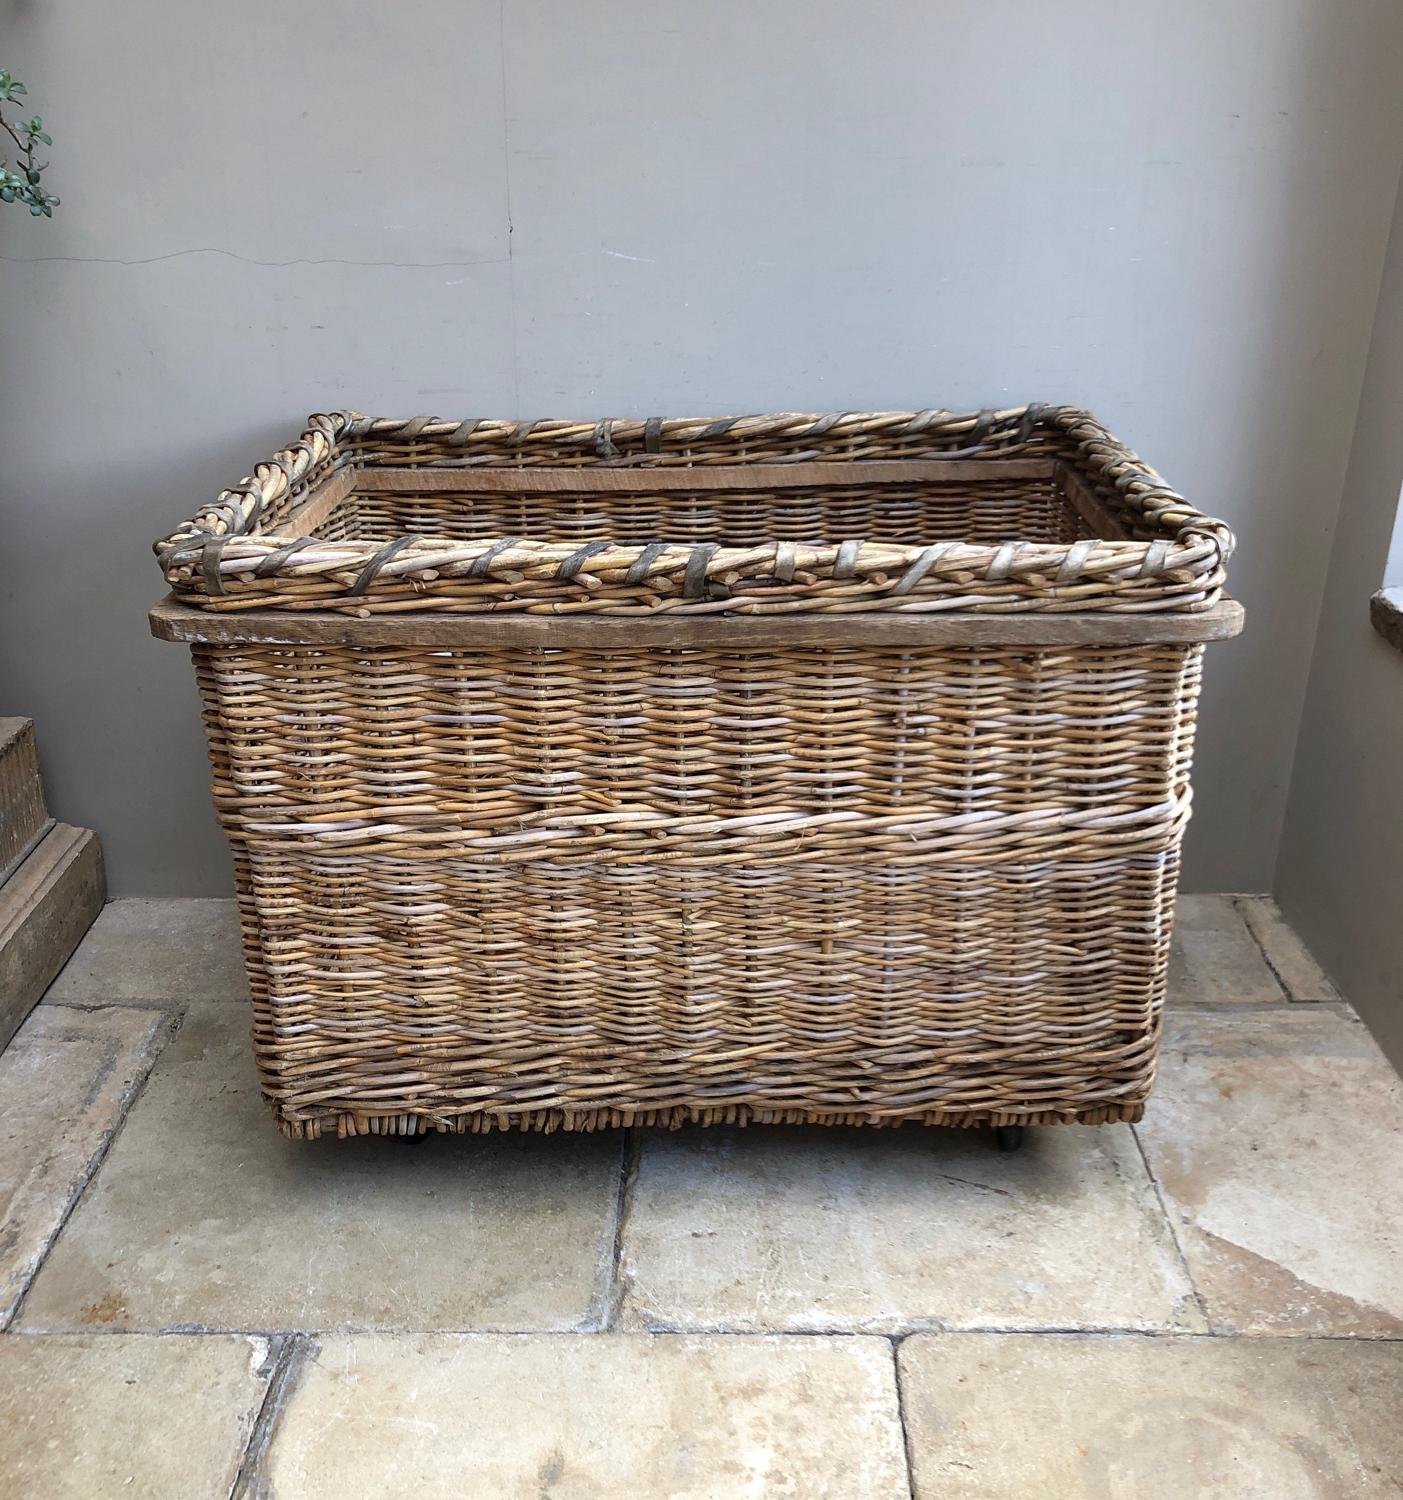 Huge Early 20thC Mill Basket in Excellent Condition - Later Castors